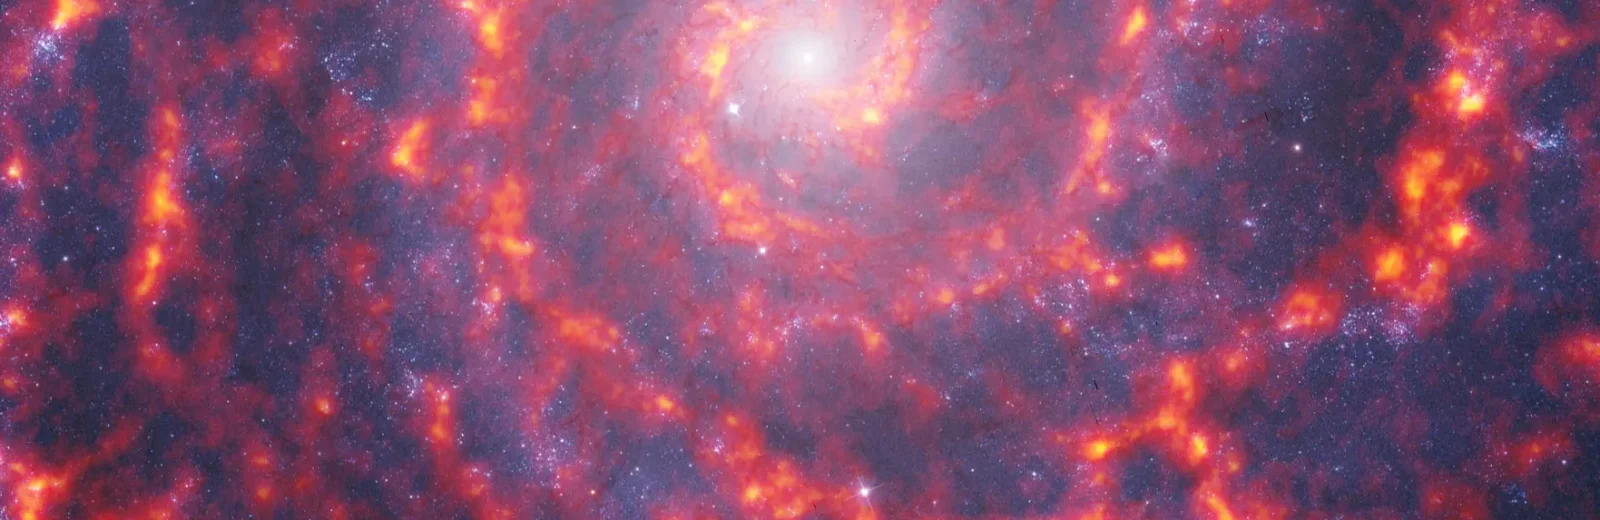 ALMA carries out large census of ‘star factories’ in other galaxies